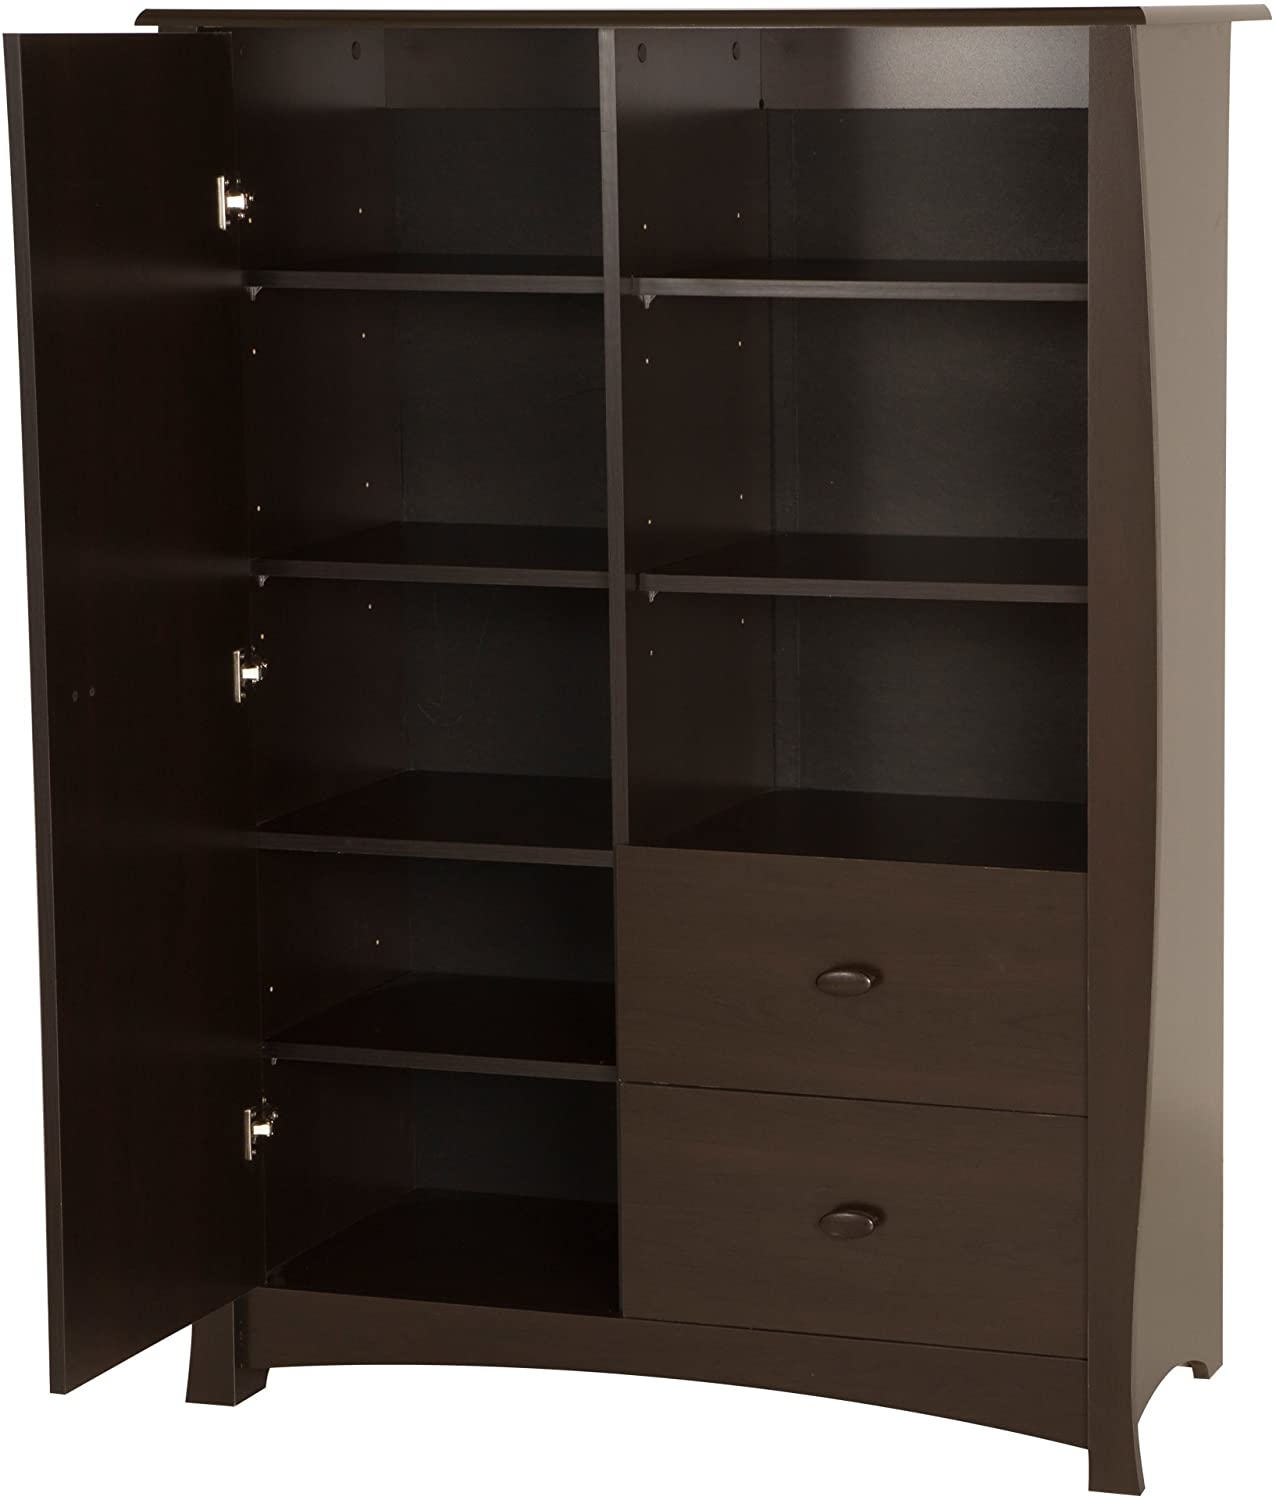 South Shore Beehive Armoire with Drawers, Espresso